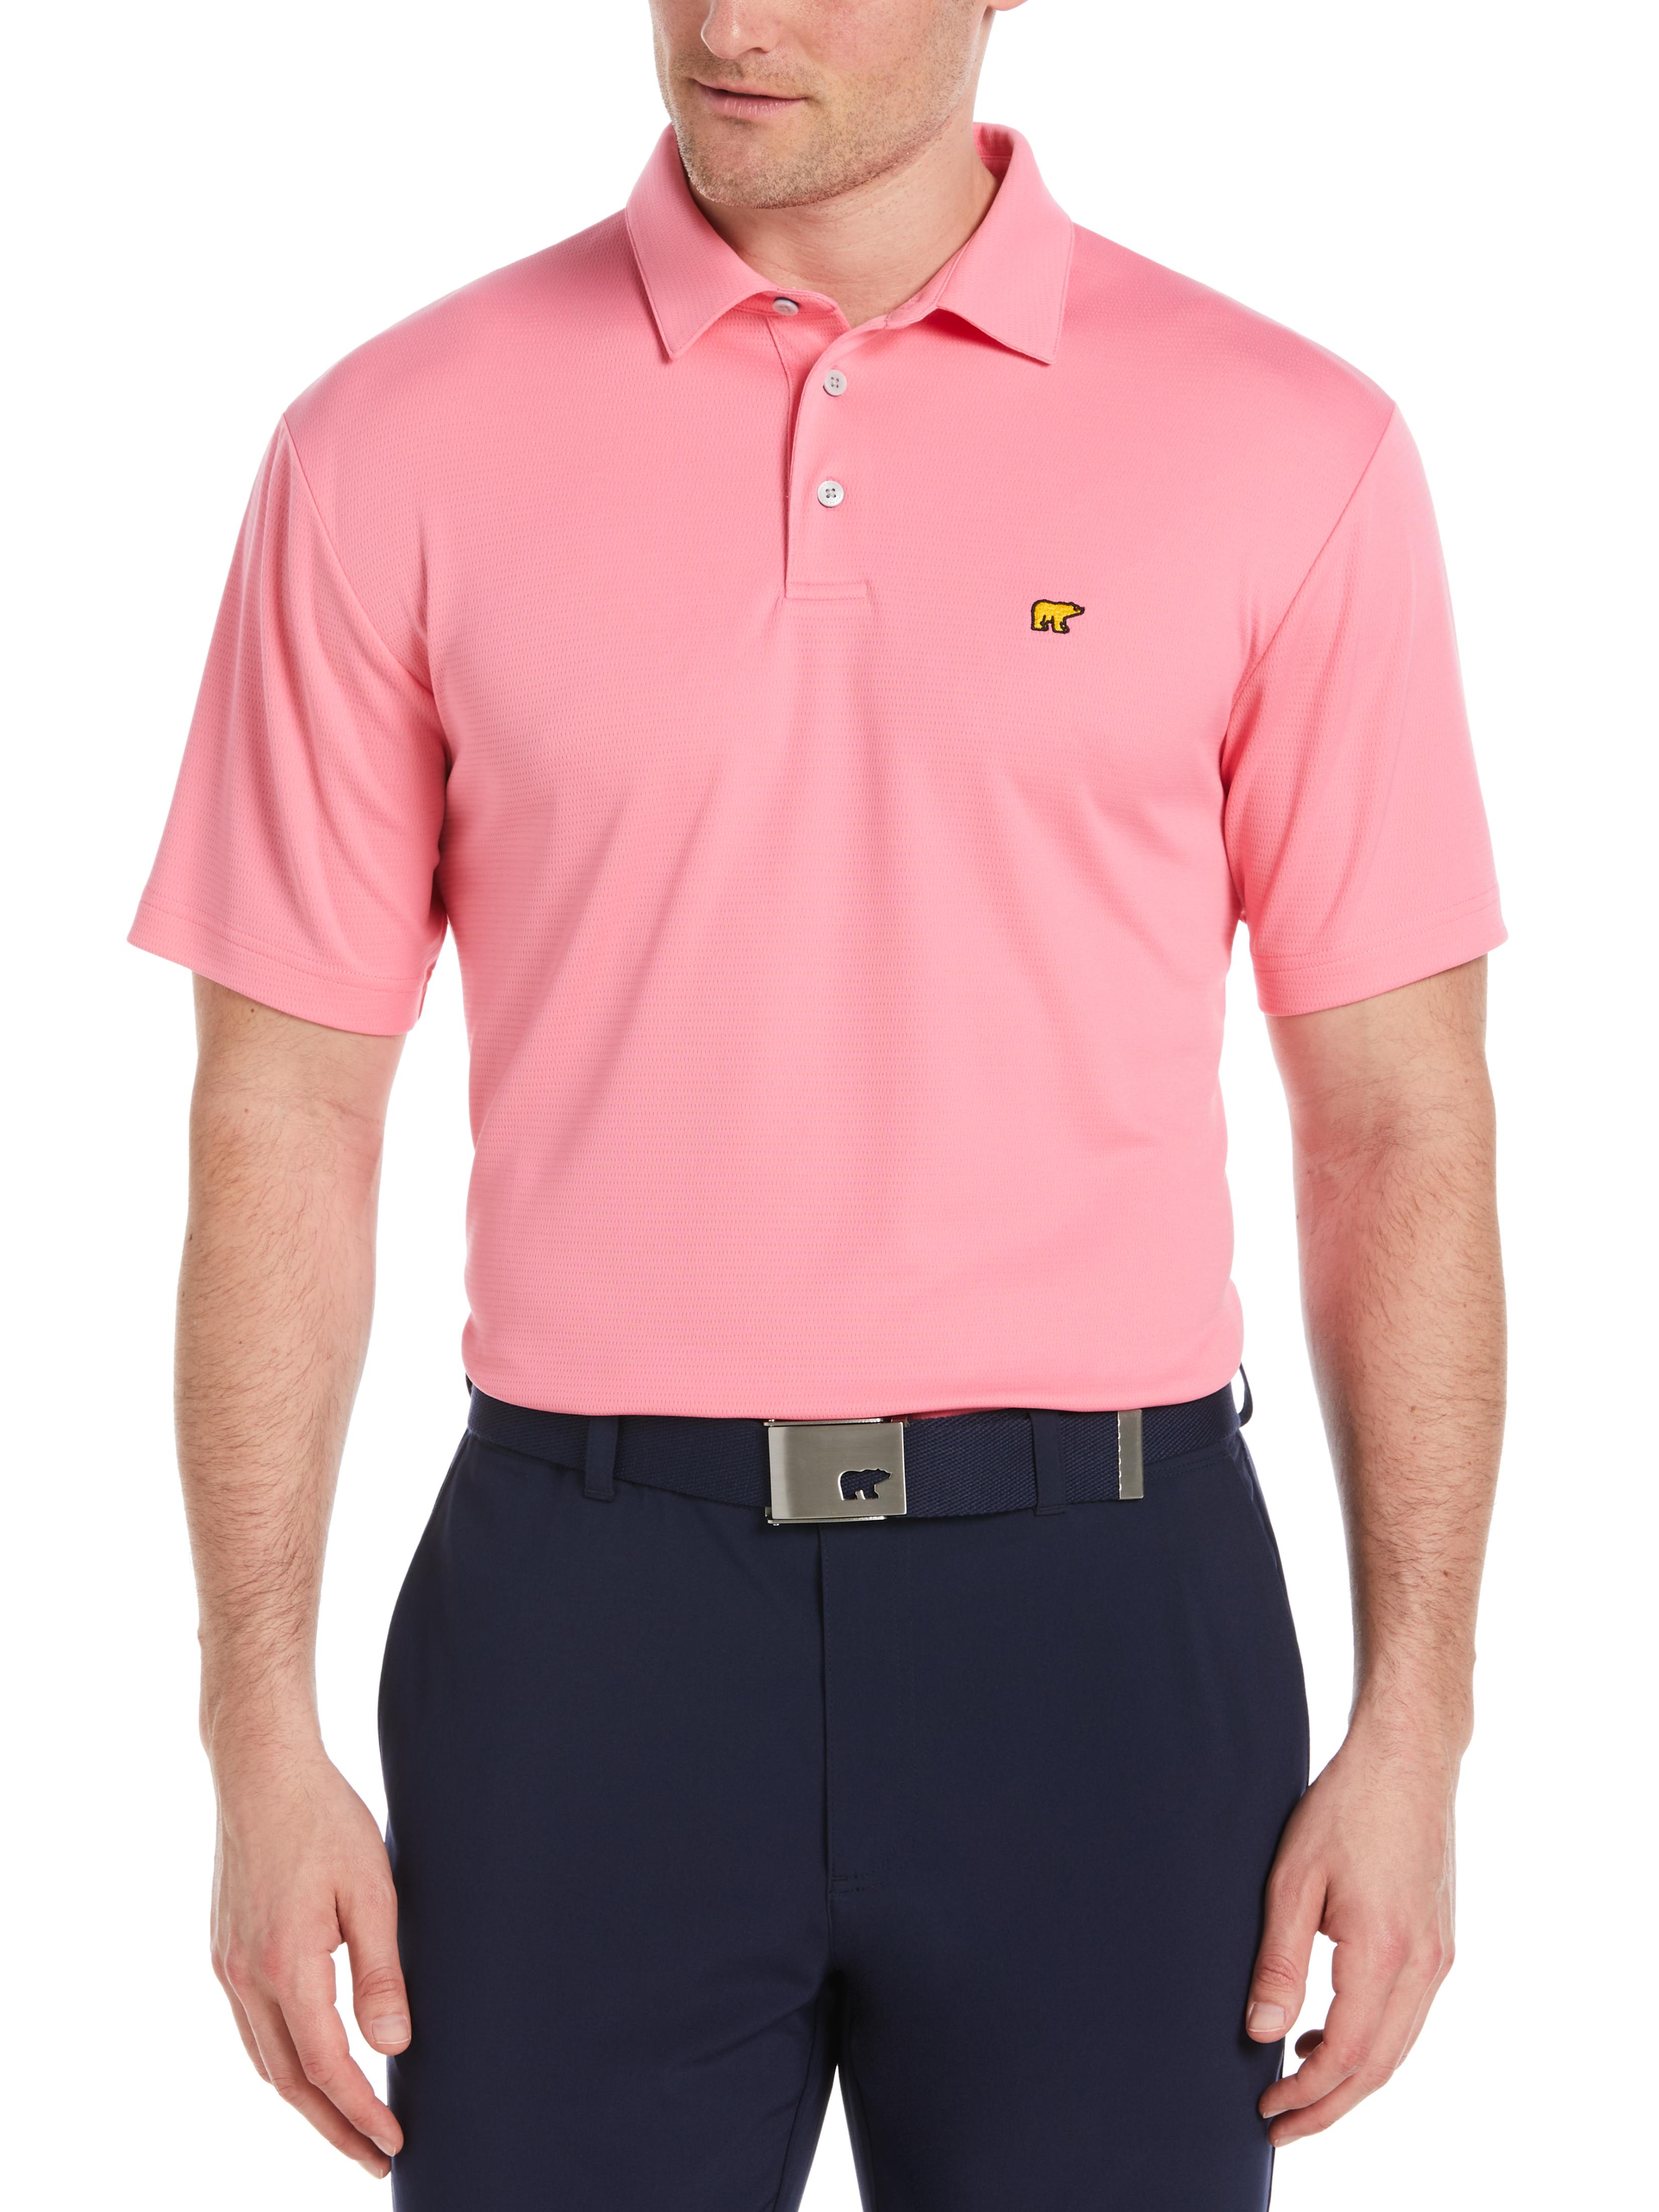 Jack Nicklaus Mens Solid Textured Golf Polo Shirt, Size Large, Flowering Ginger Pink, 100% Polyester | Golf Apparel Shop